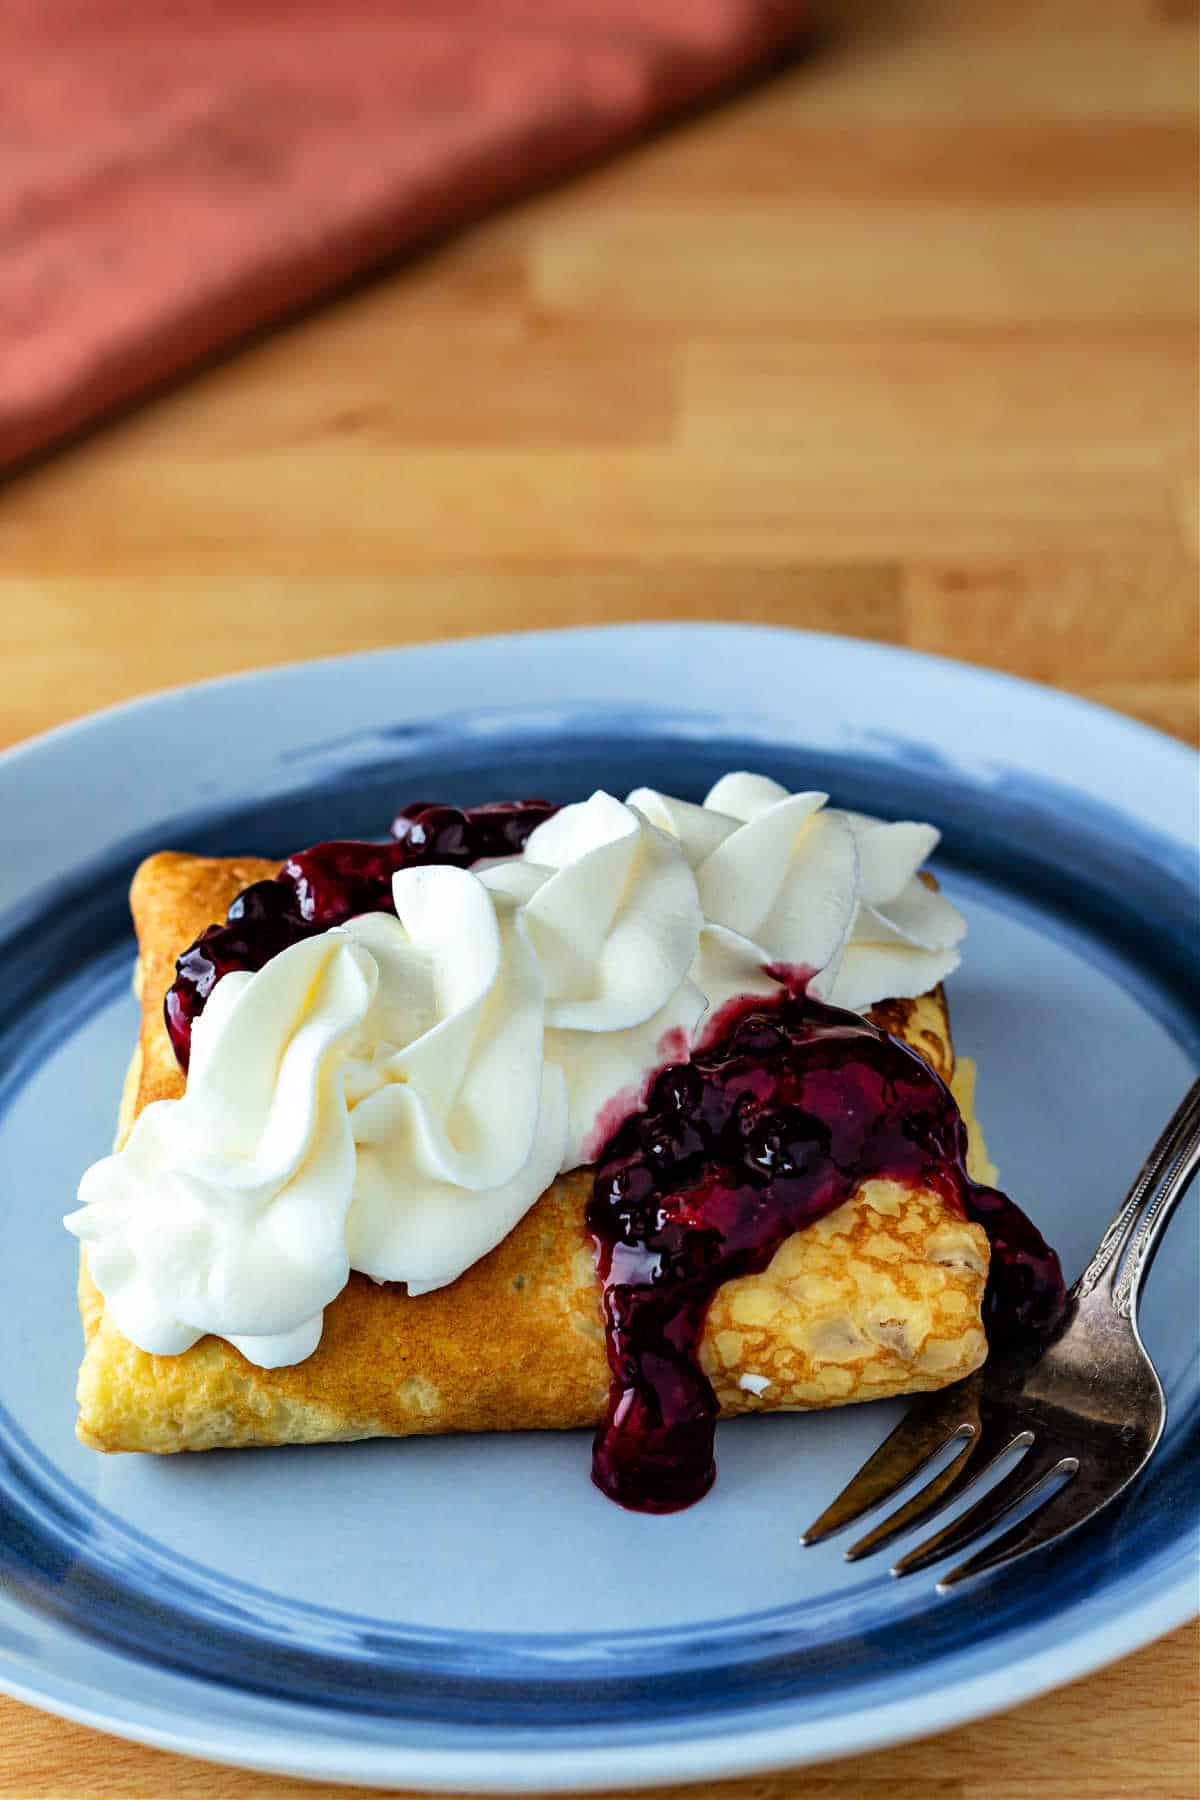 A crepe folded into a pillow shape topped with berry sauce and whipped cream. The crepe is on a blue plate with a fork to the right.